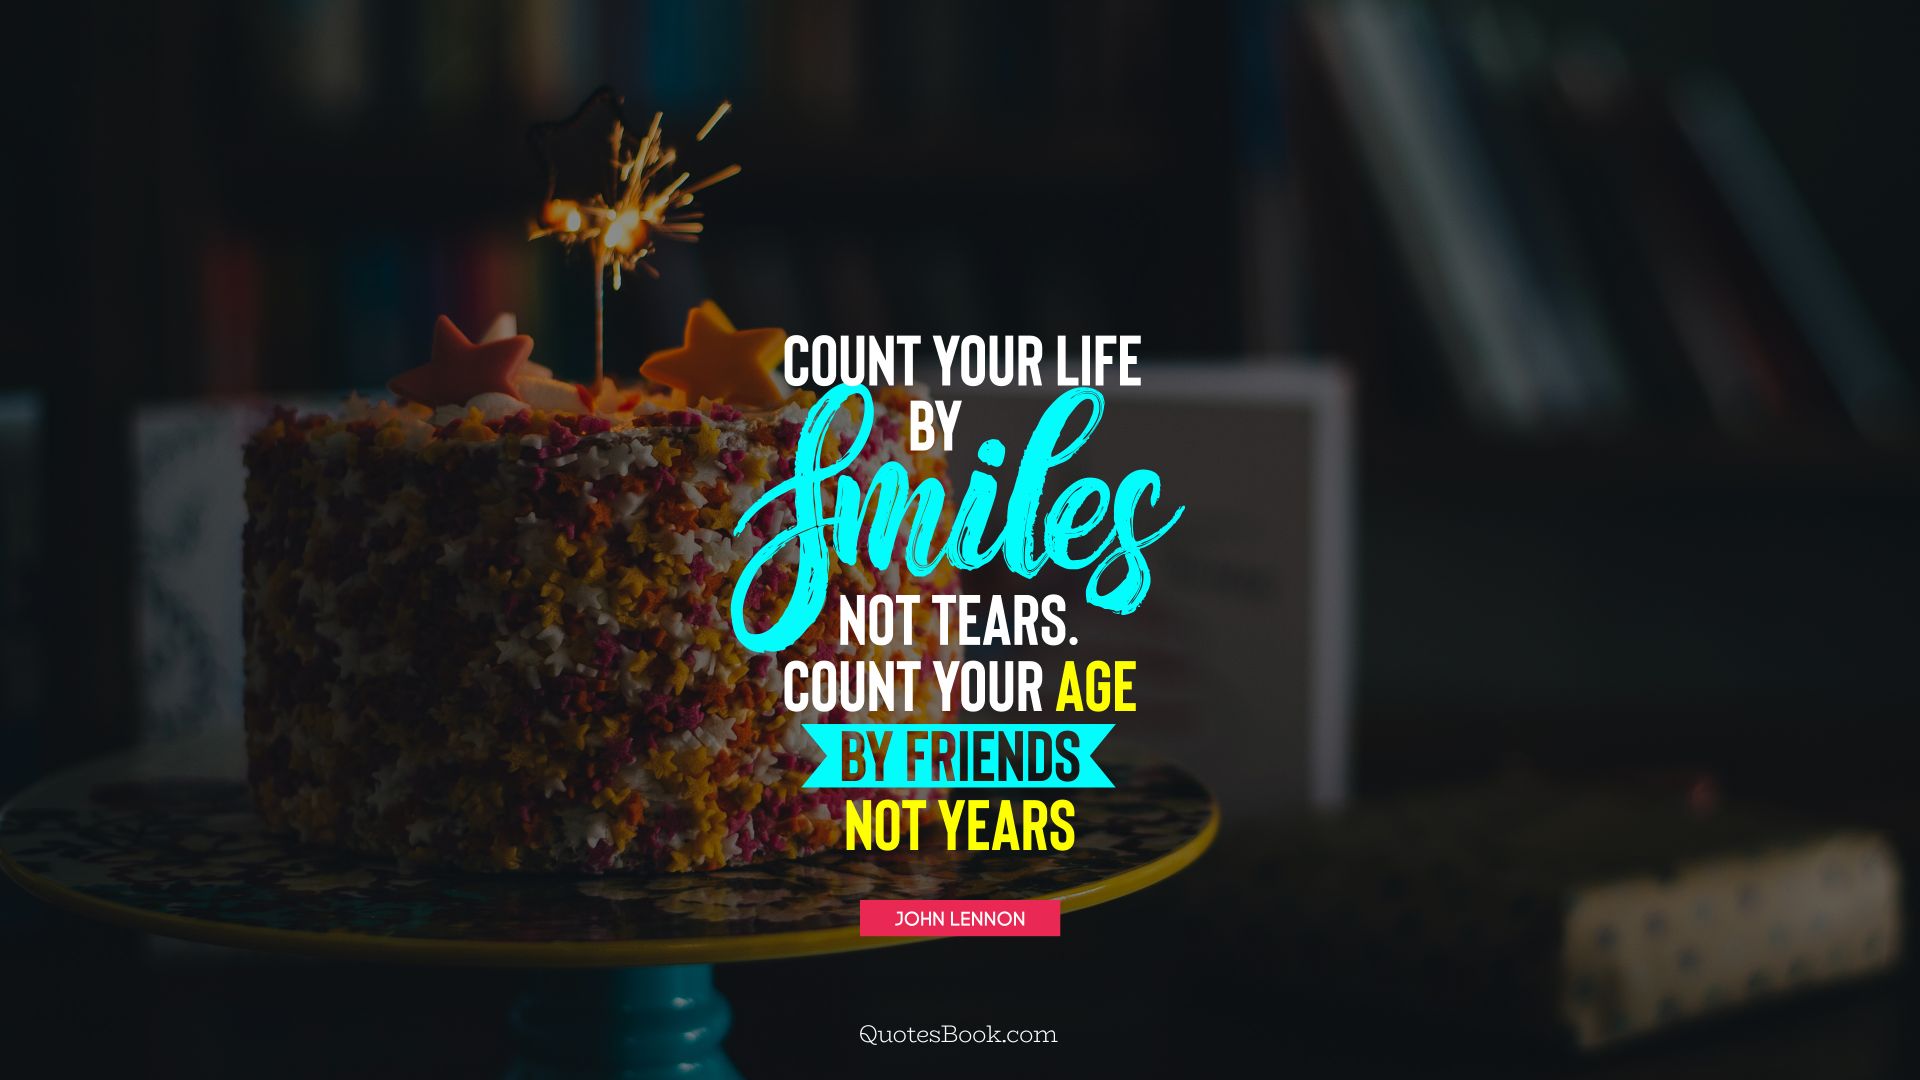 Count your life by smiles not tears. Count your age by friends not years. - Quote by John Lennon